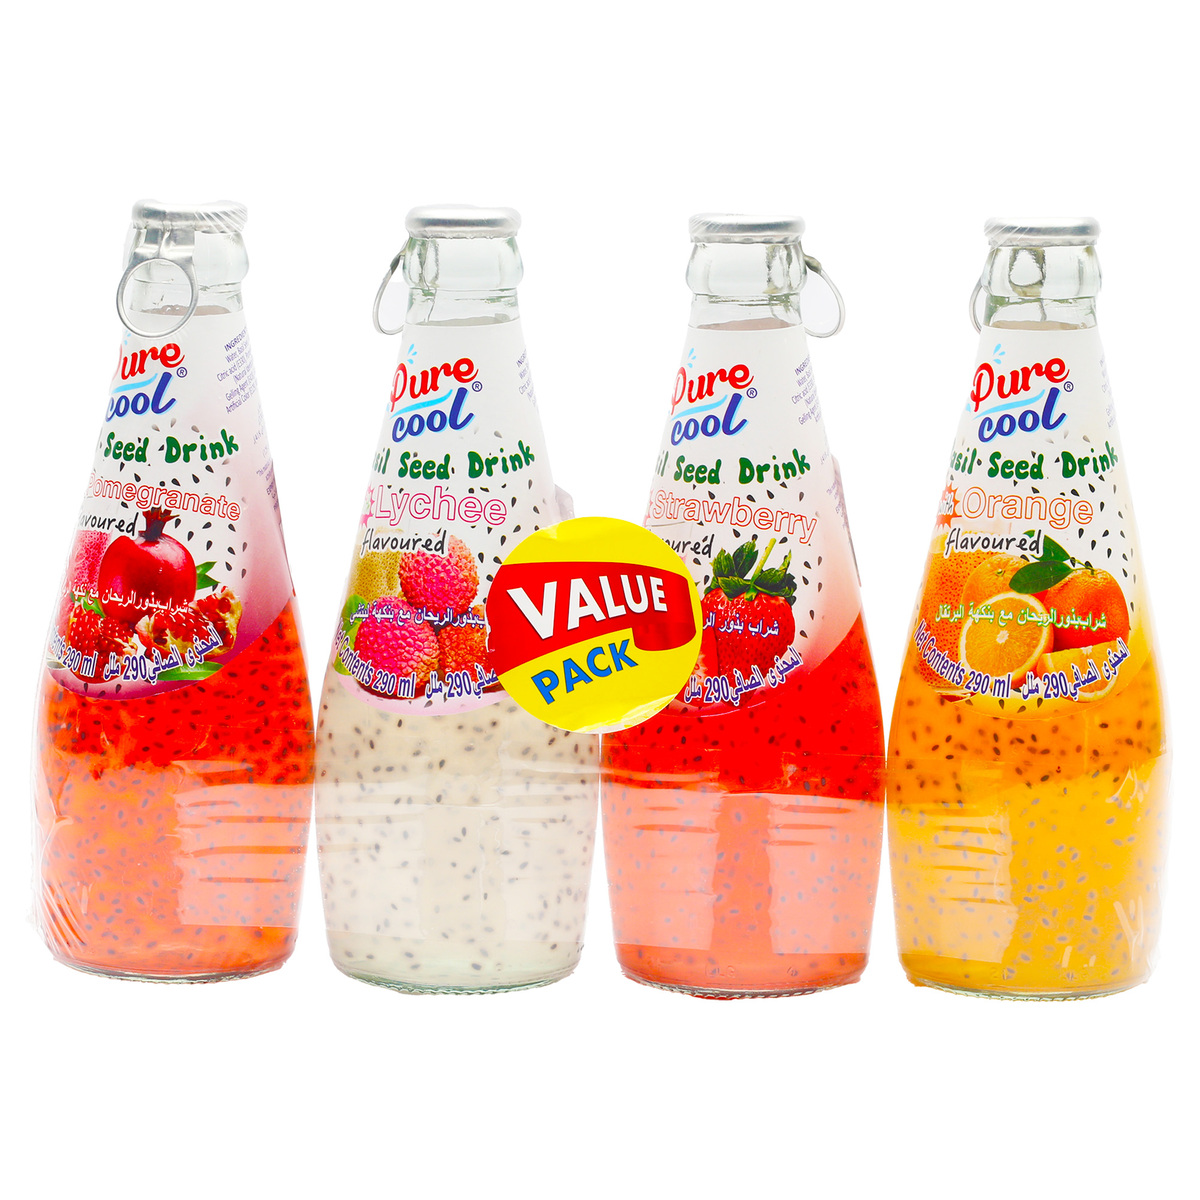 Pure Cool Basil Seed Drink Assorted 4 x 290 ml